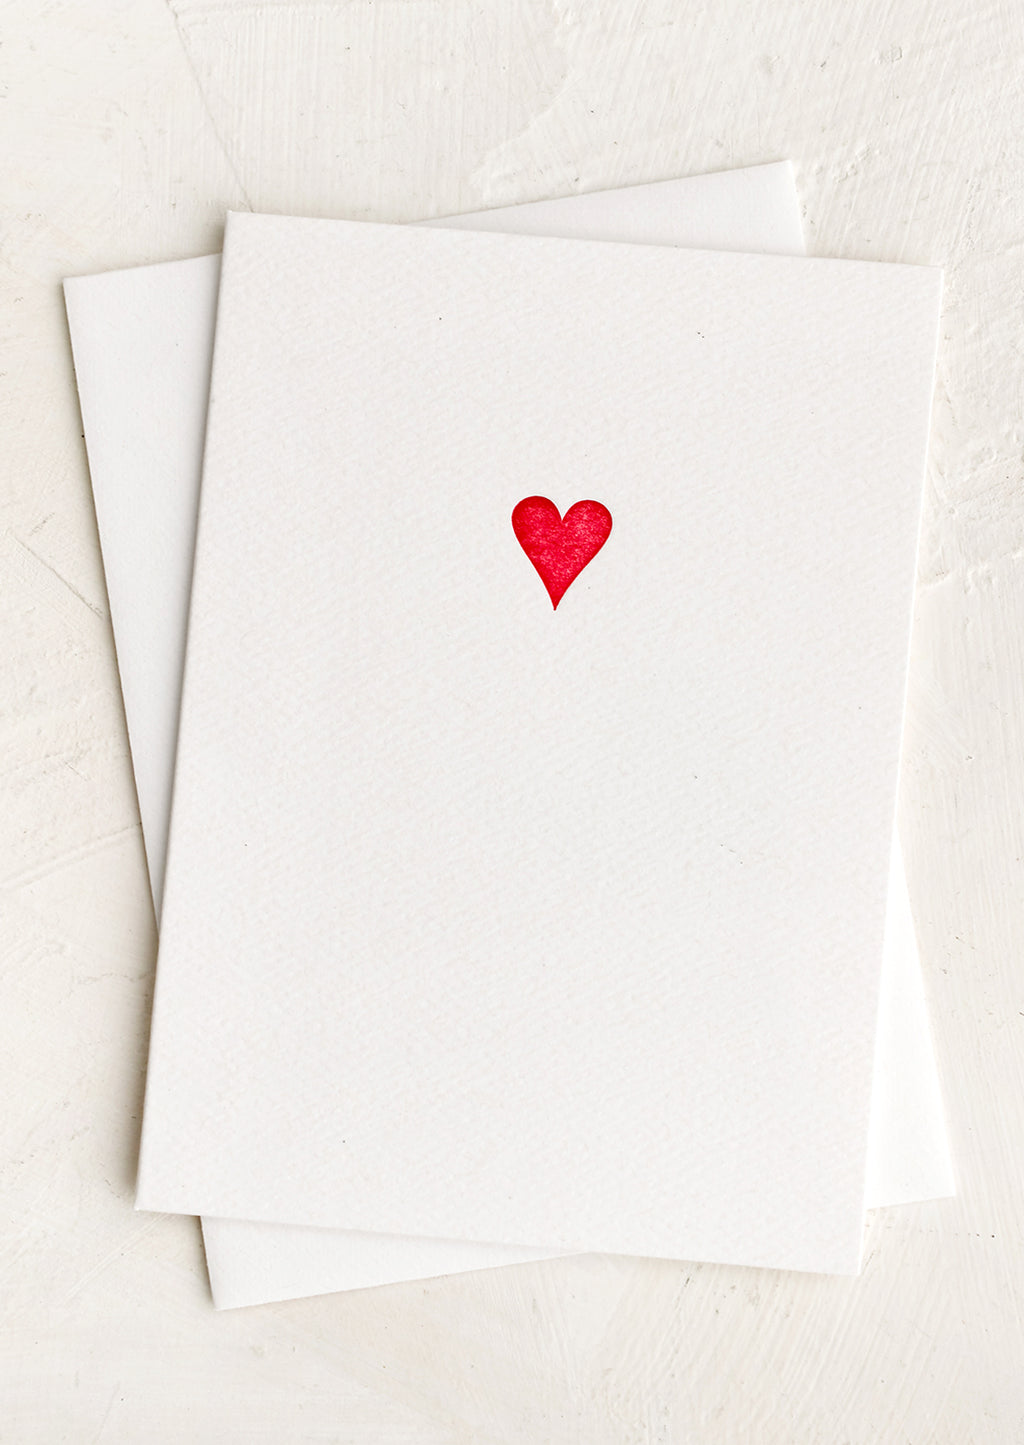 Red Heart: A plain white card with small red heart icon at front.